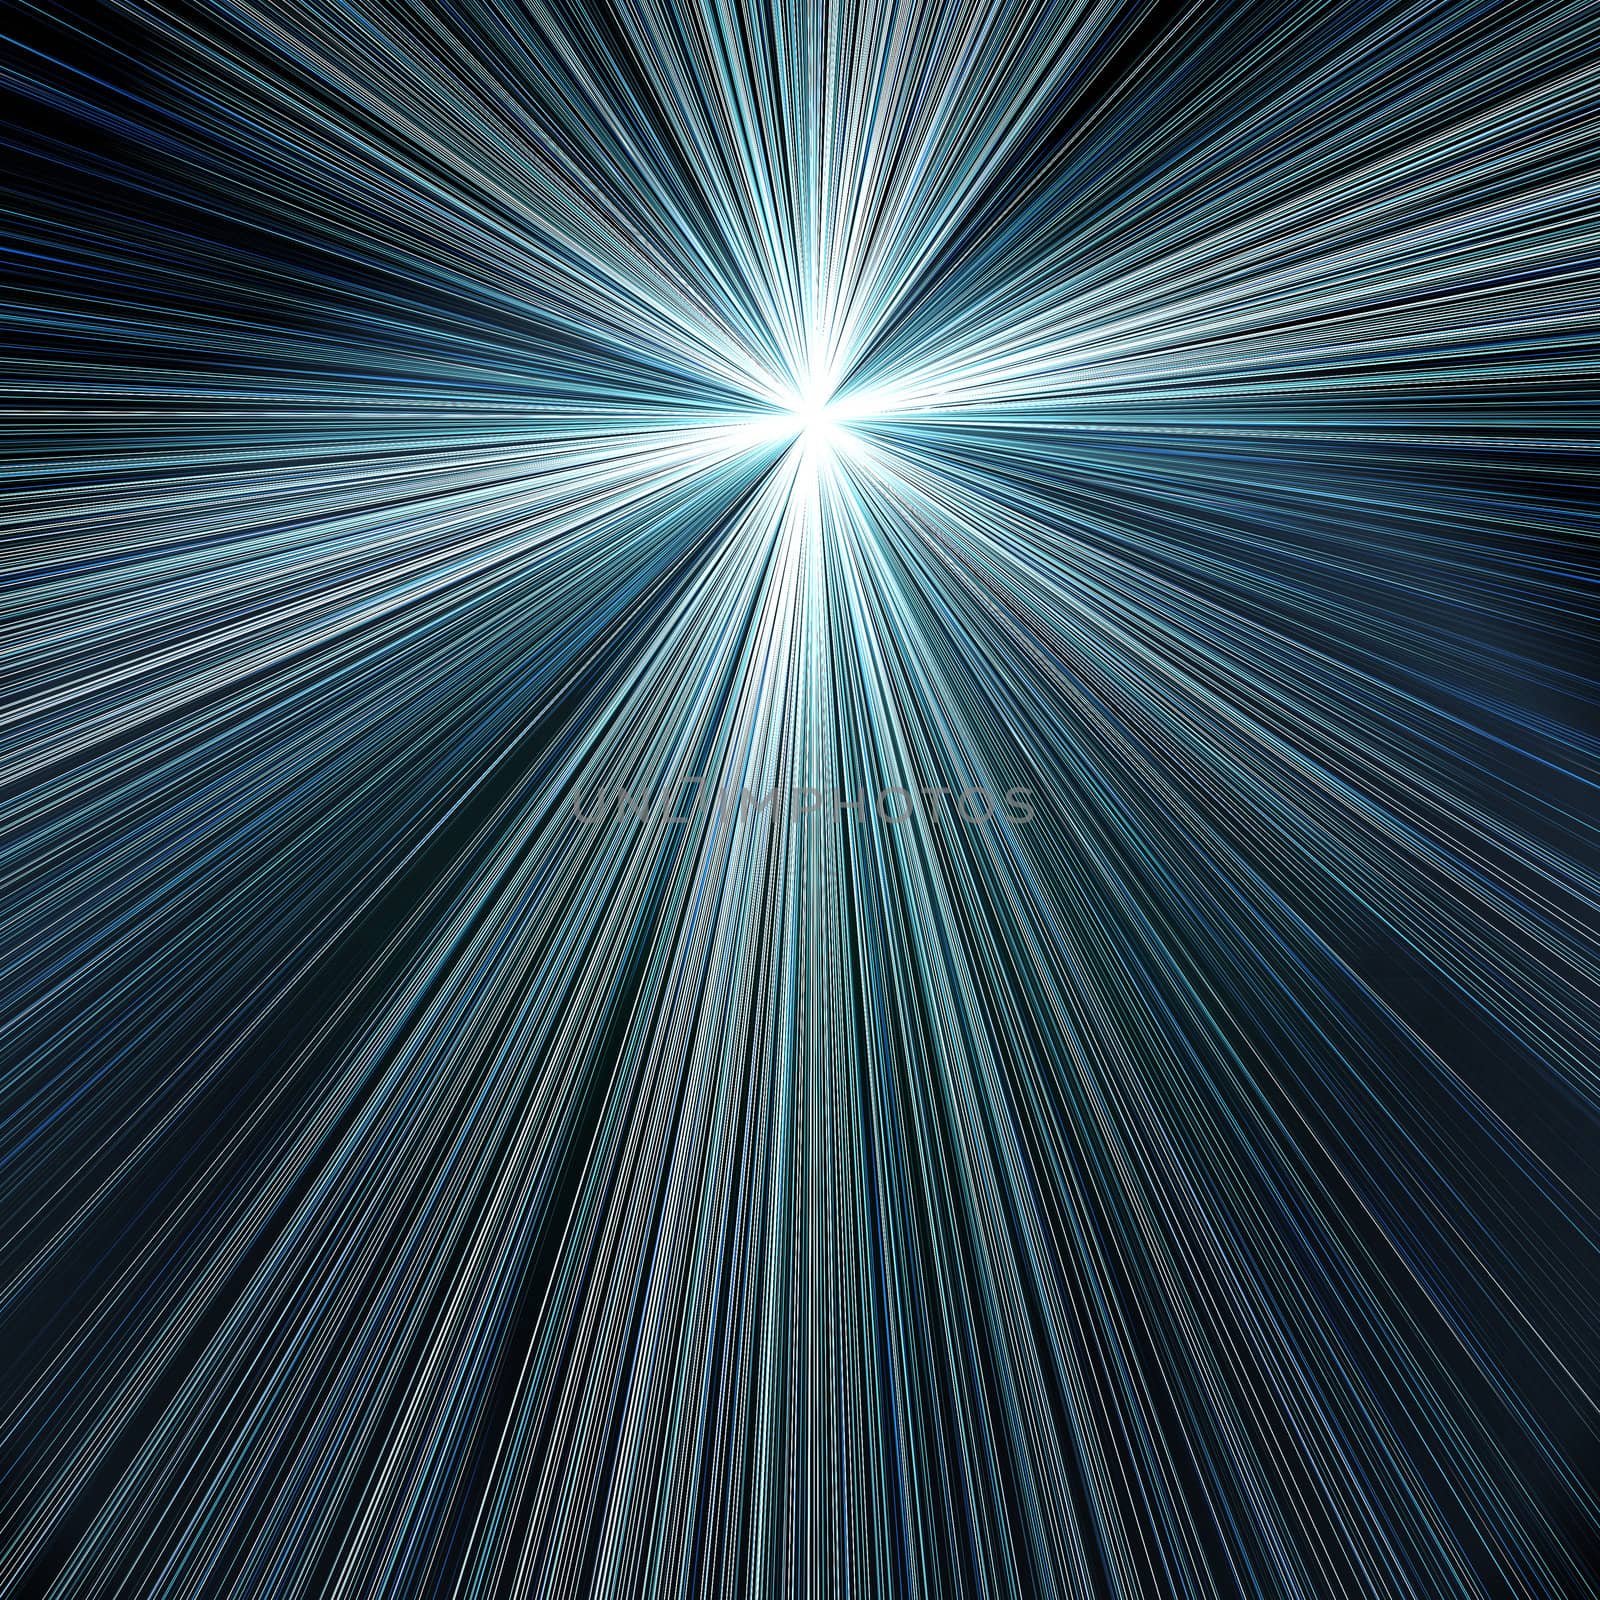 An illustration of a bright star background